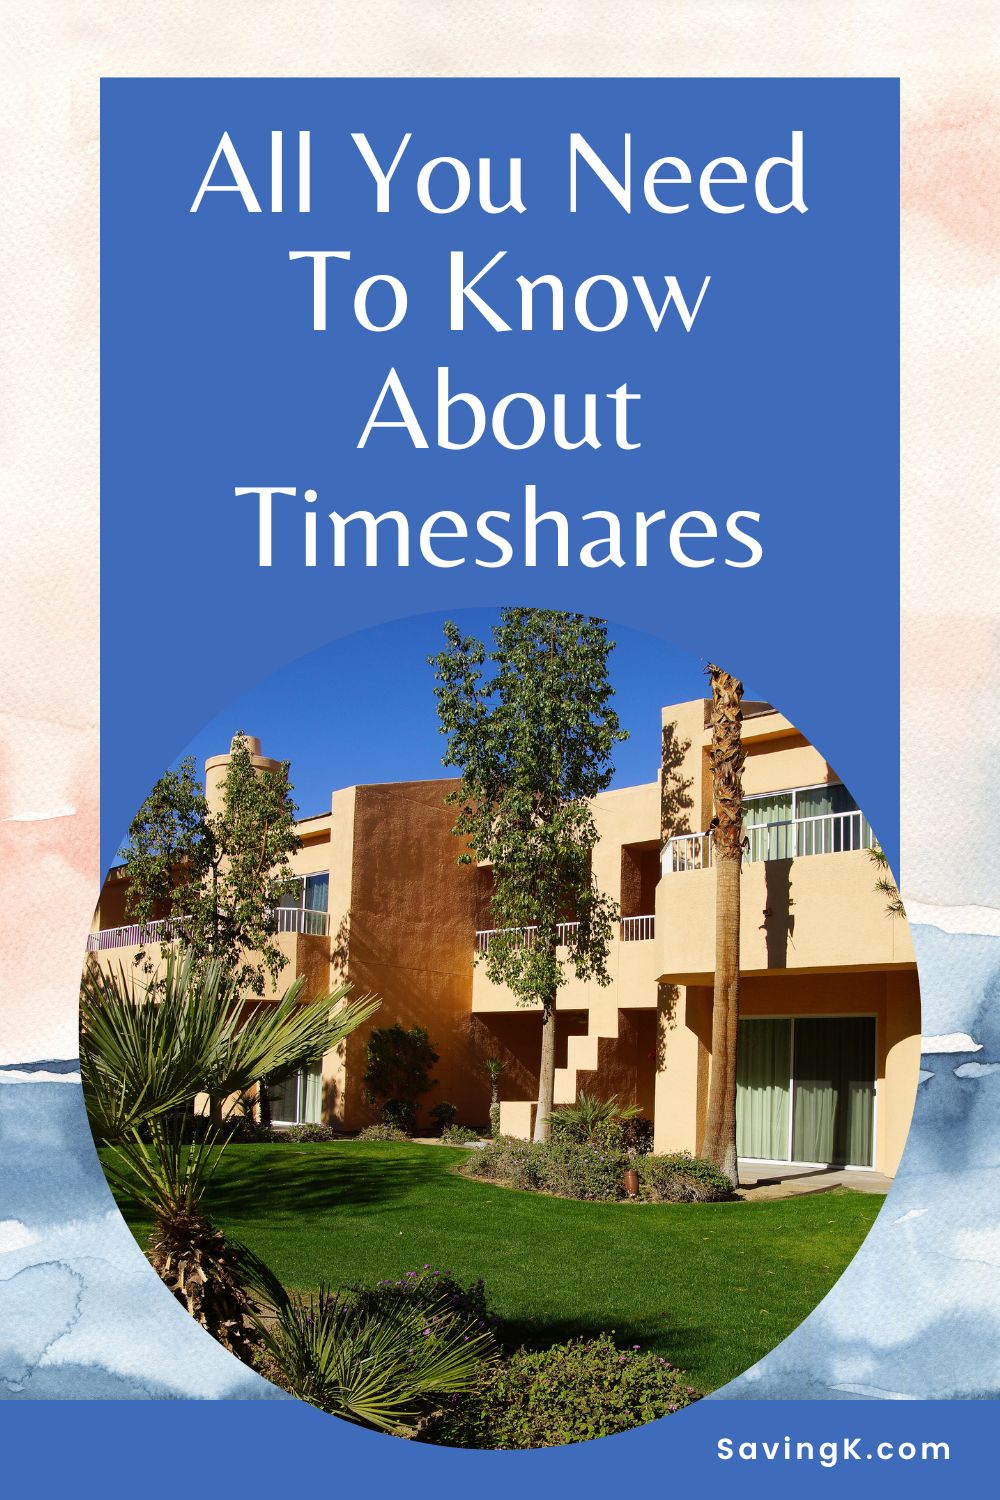 All You Need To Know About Timeshares